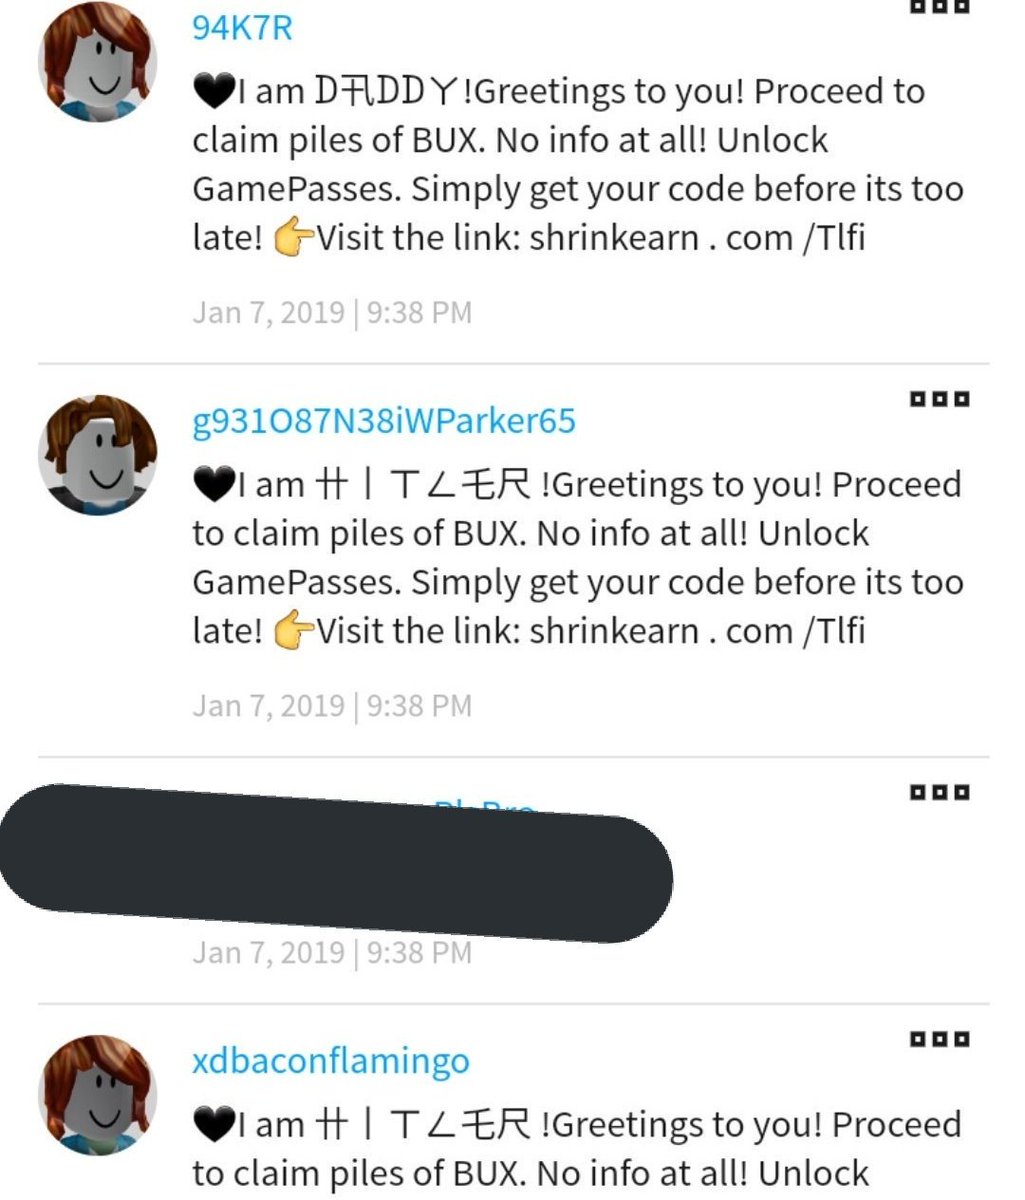 Lord Cowcow On Twitter Roblox Scam Bots Claim To Be Able To Give You Tons Of Robux But Now They Also Claim To Be Hitler - roblox visit bot